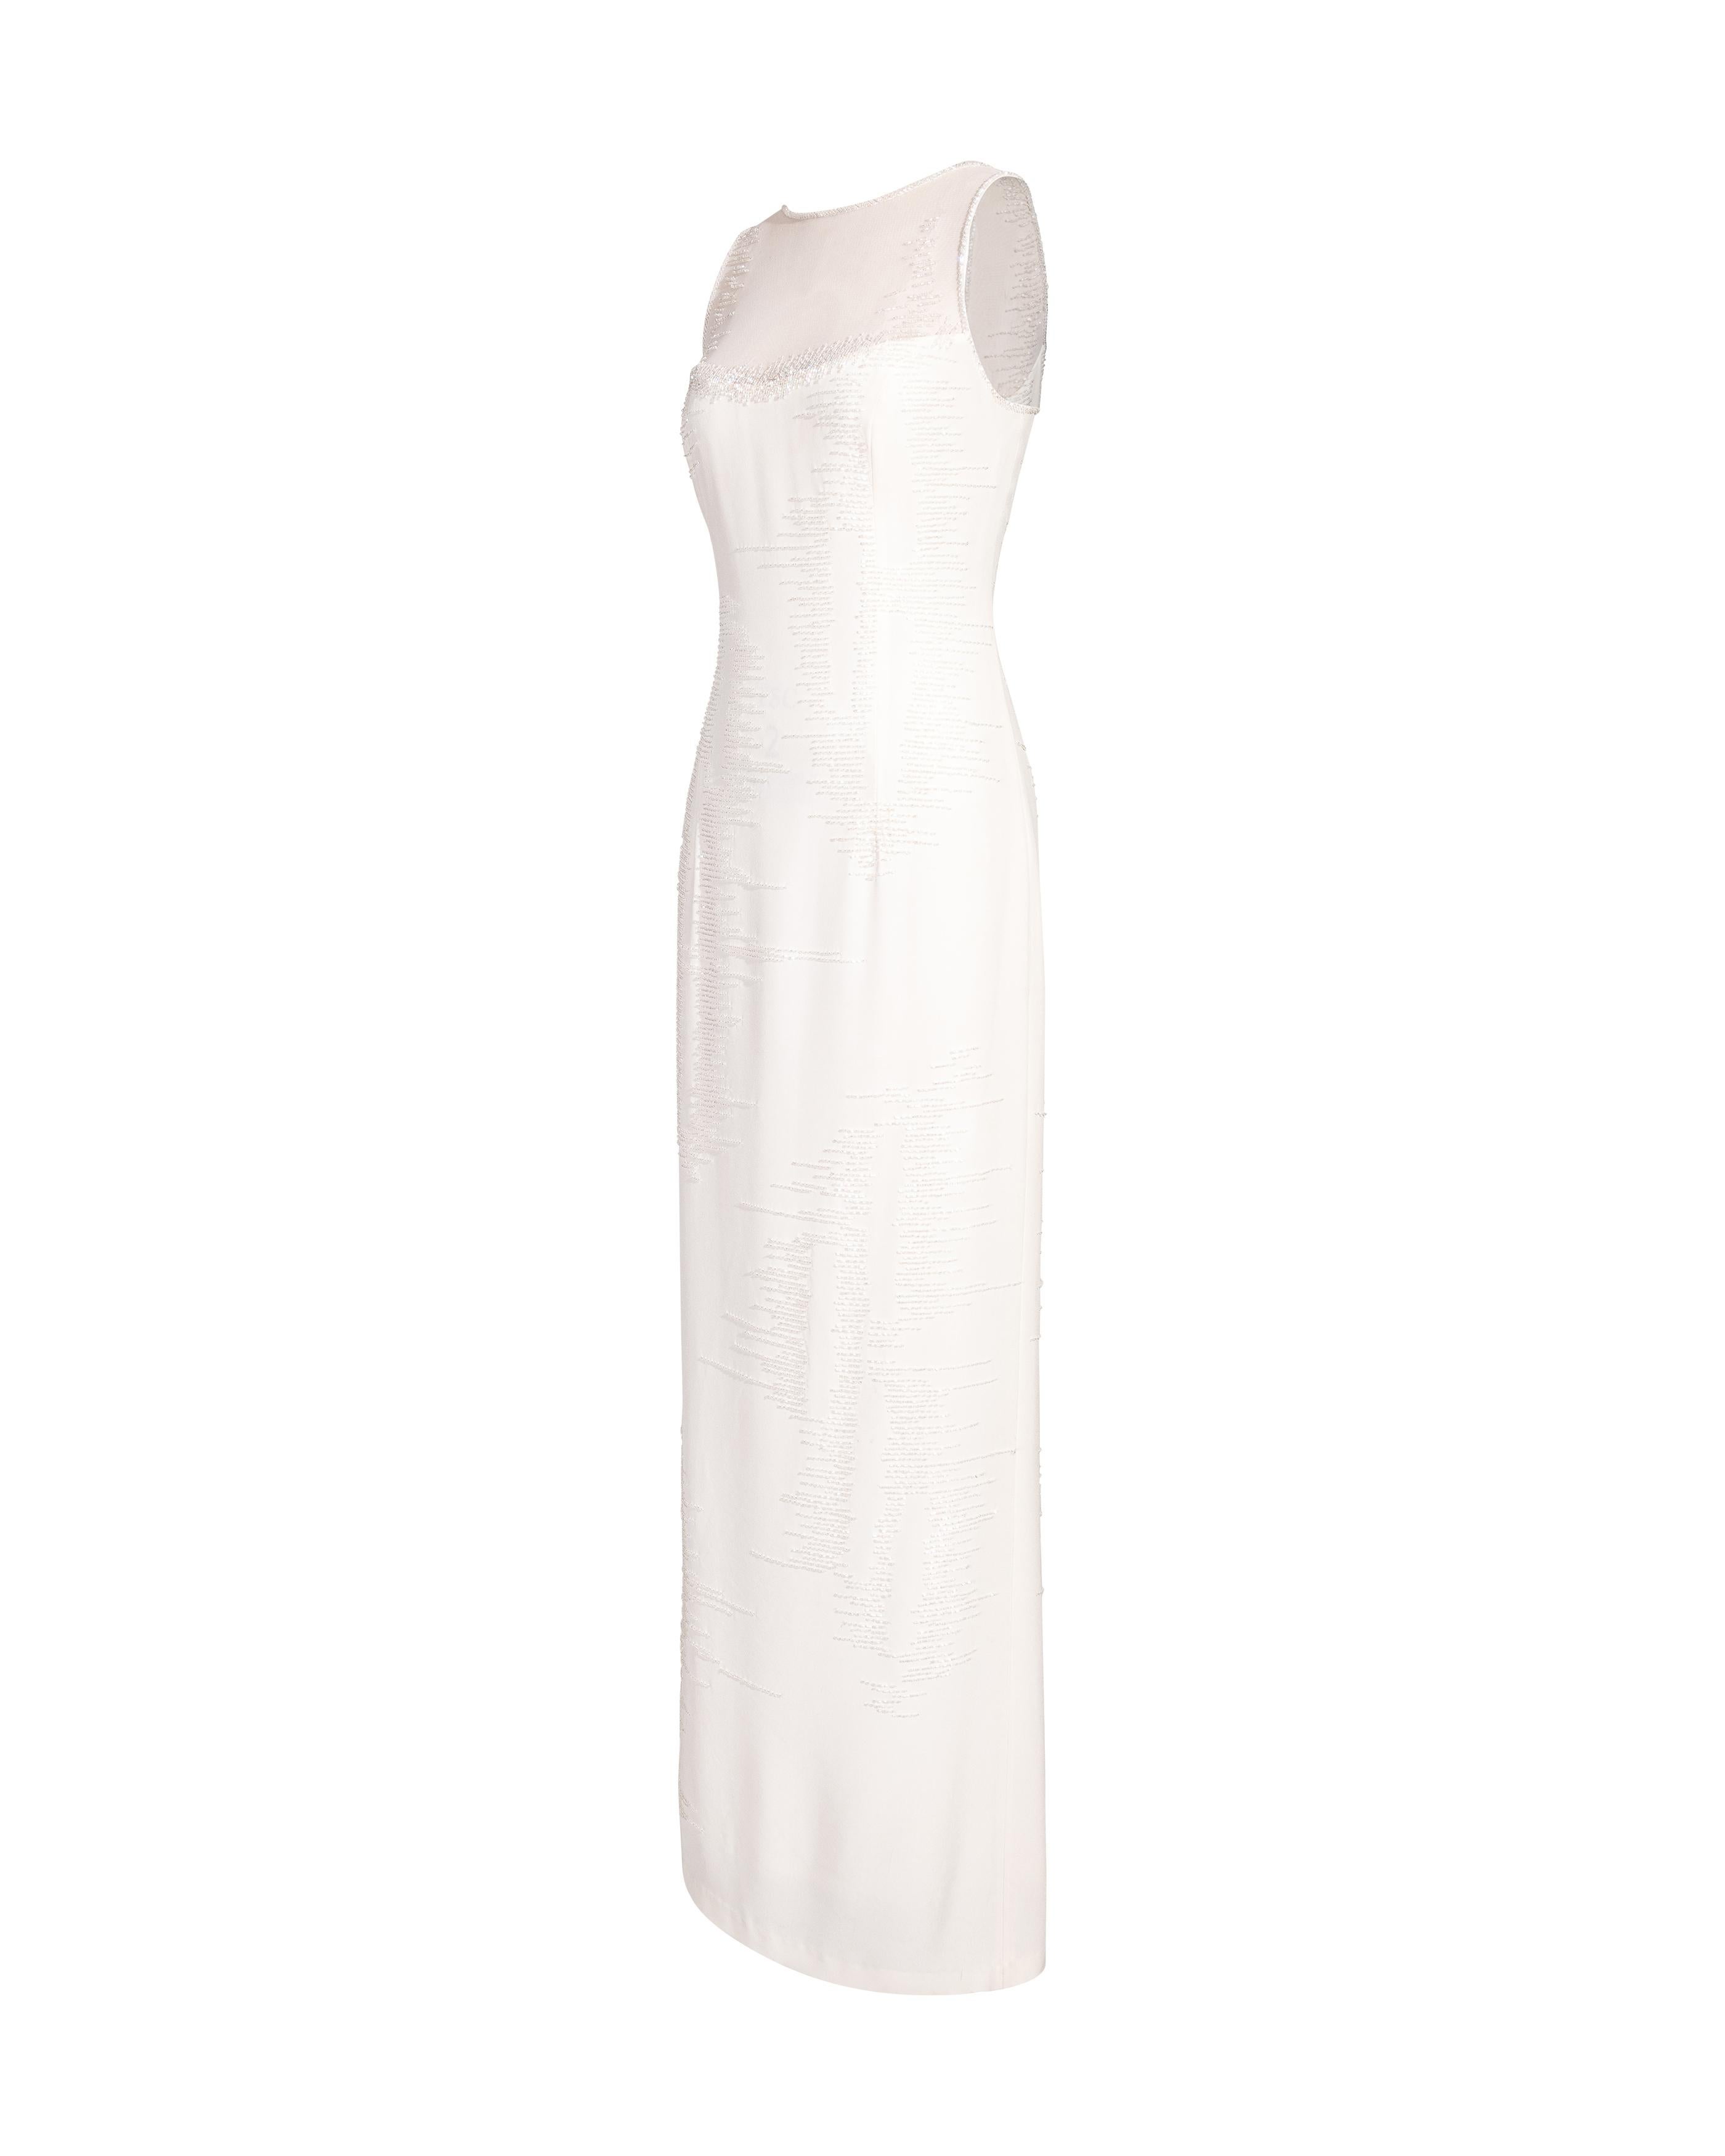 1980's Bob Mackie ivory embellished sleeveless gown. Sleeveless white gown with beaded trim and beaded radiated stripe pattern throughout. Semi-sheer white mesh upper and back. Concealed back zip closure. Fabric Contents: 80% Tri-acetate; 20%